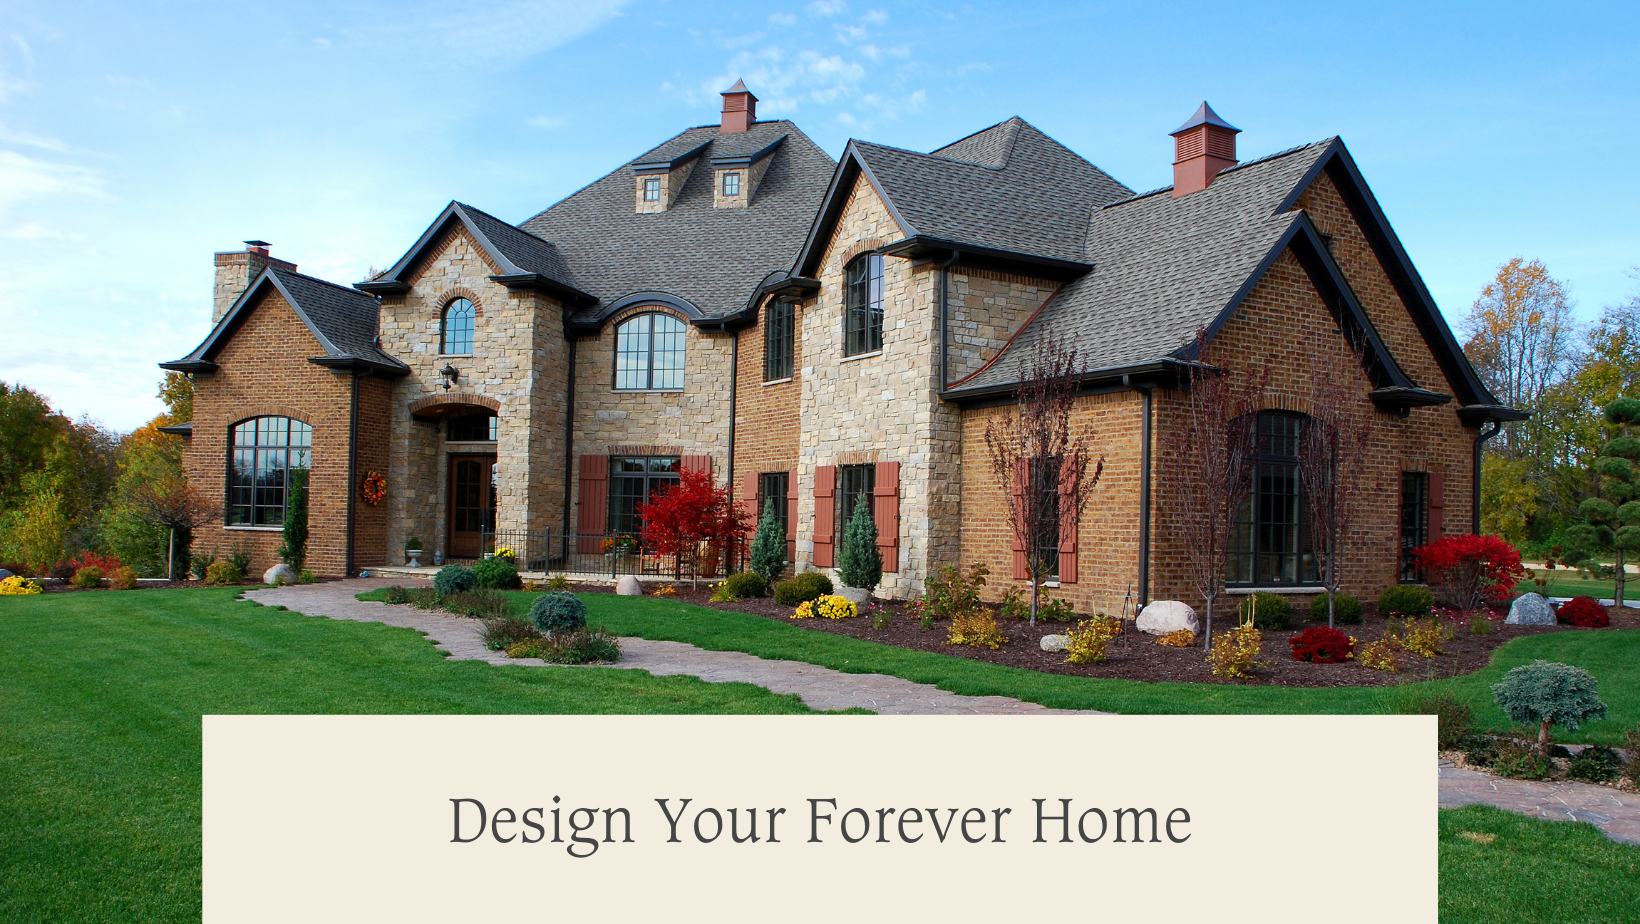 Design Your Forever Home